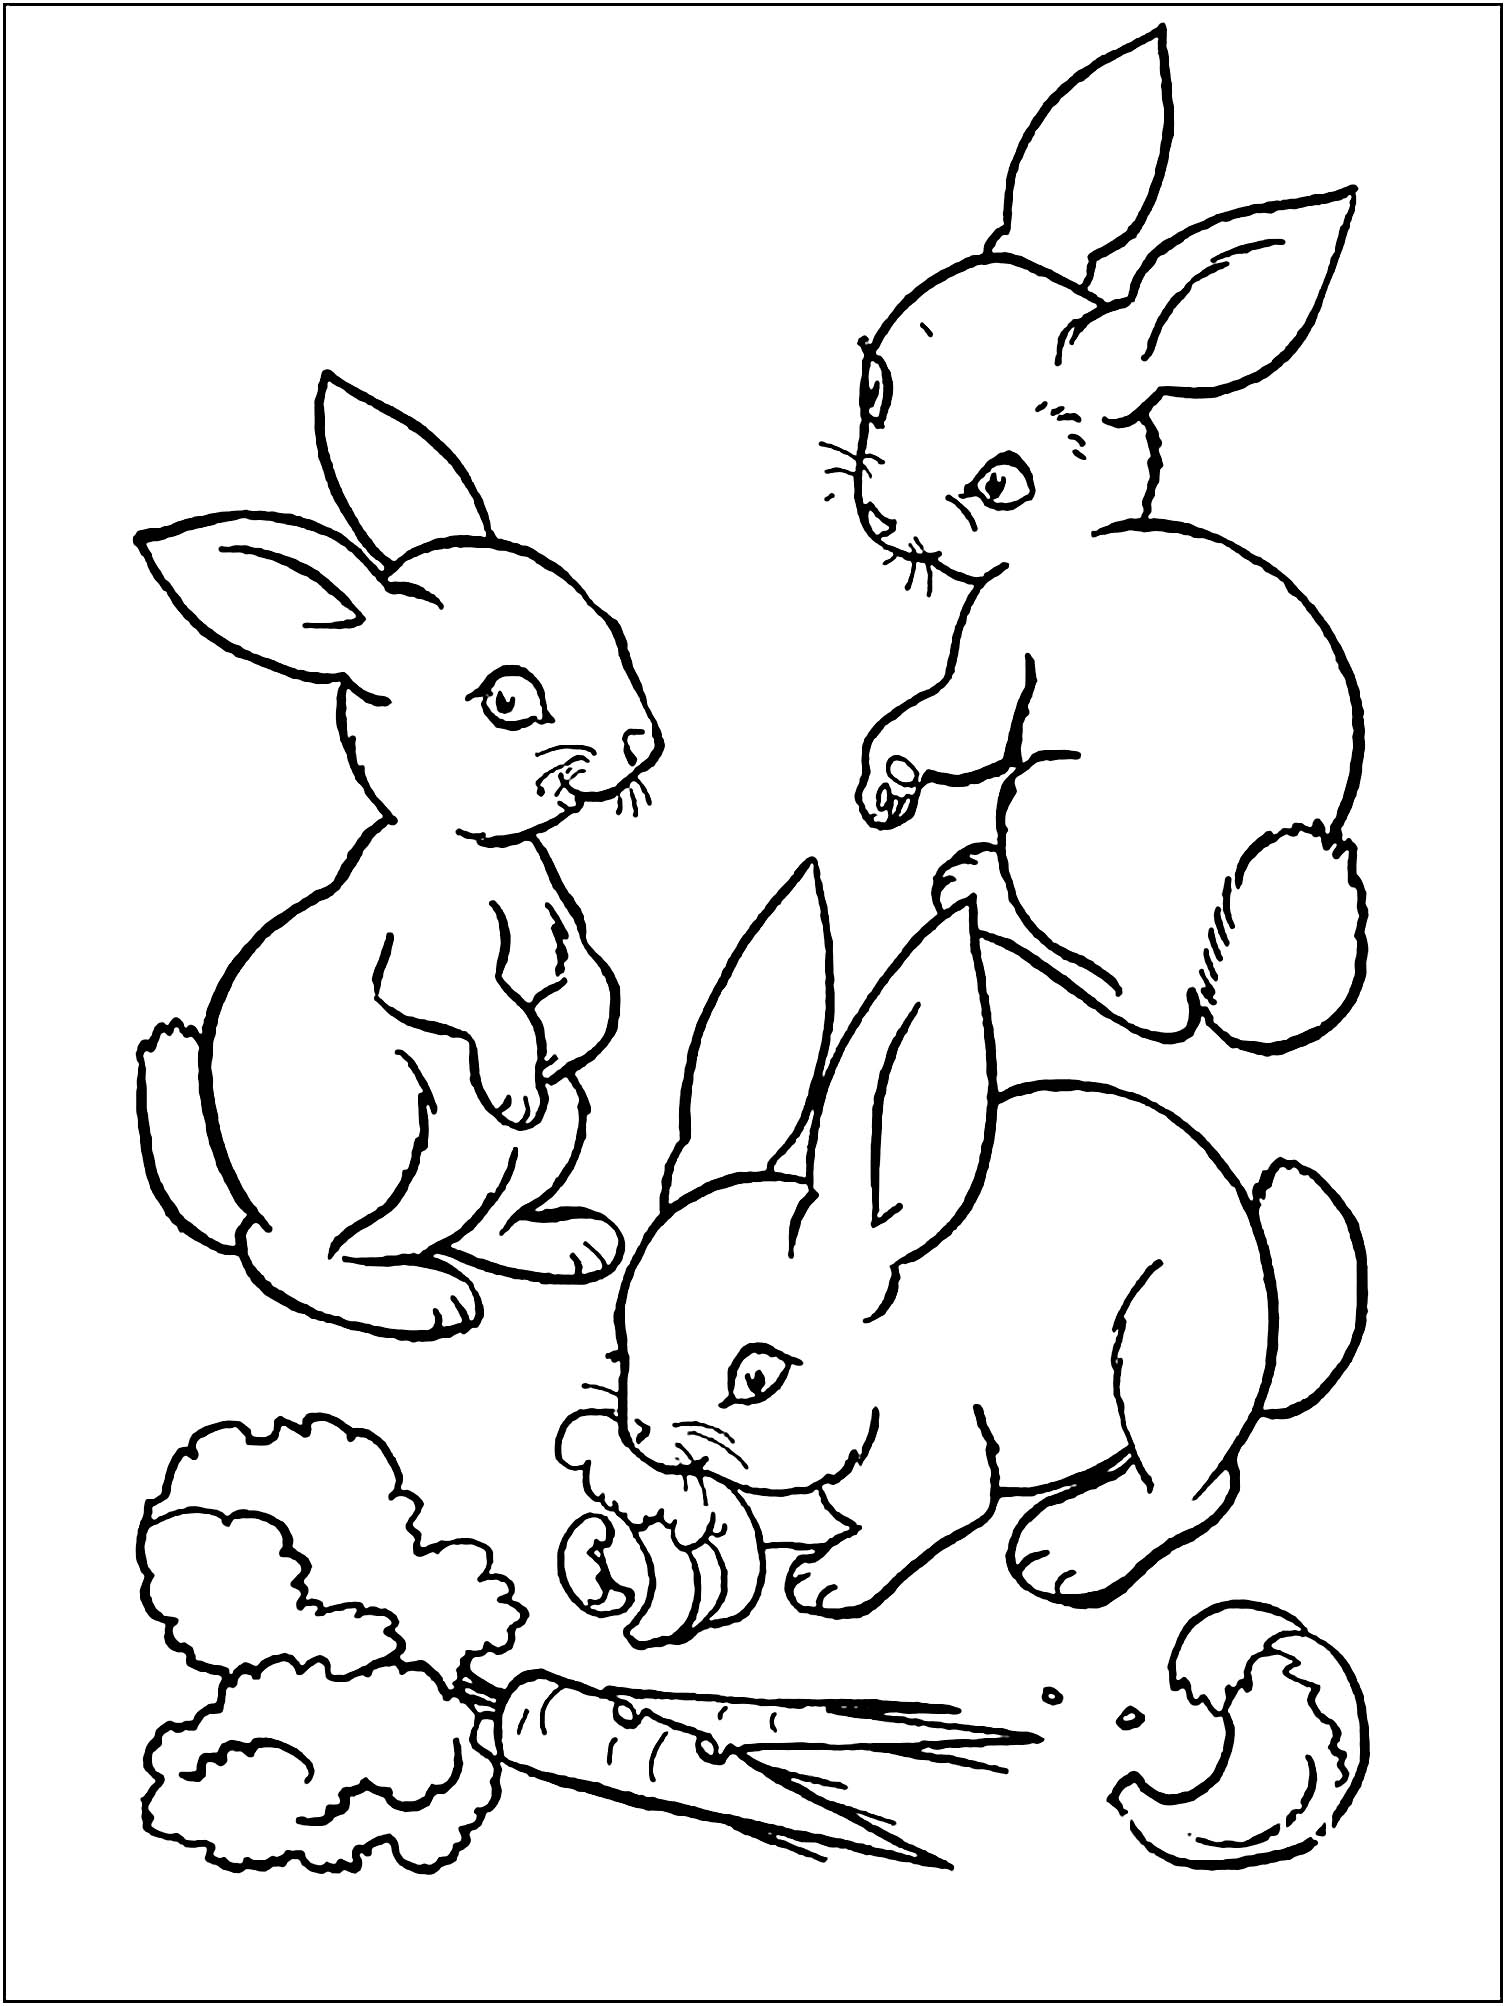 Rabbit-to-print-for-free - Rabbit Kids Coloring Pages